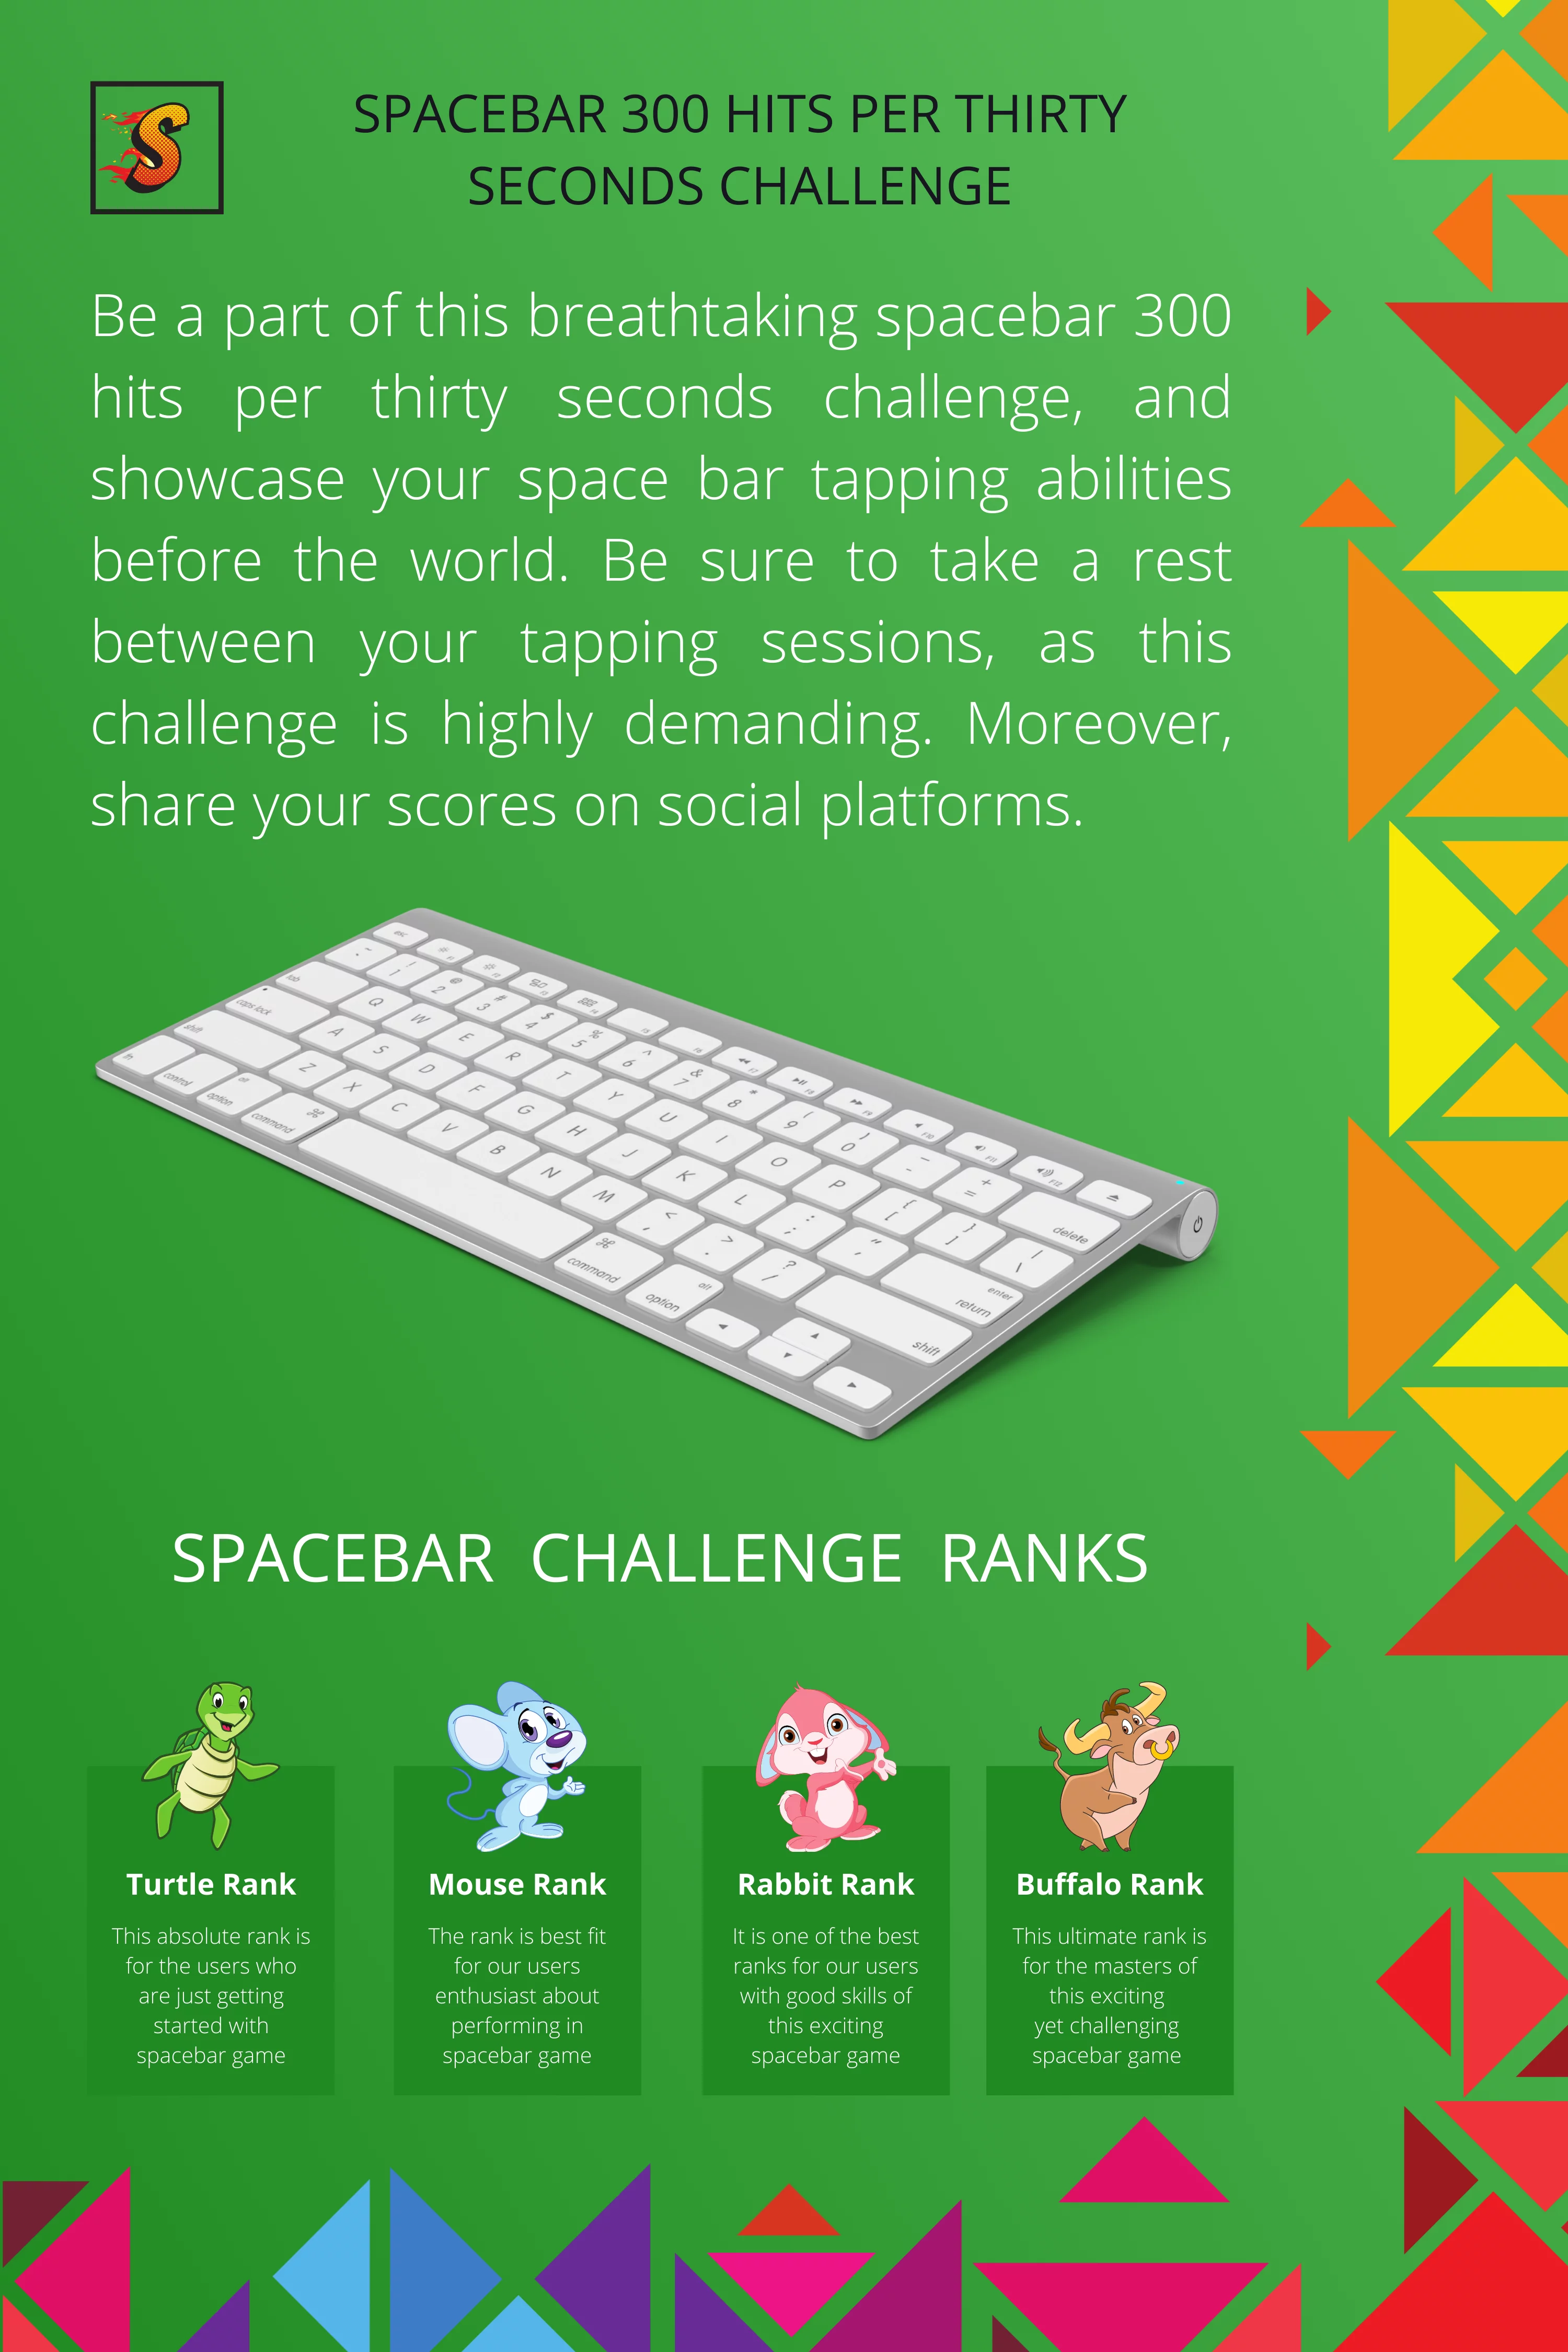 Spacebar Counter: Join The Best Keyboard Challenge 